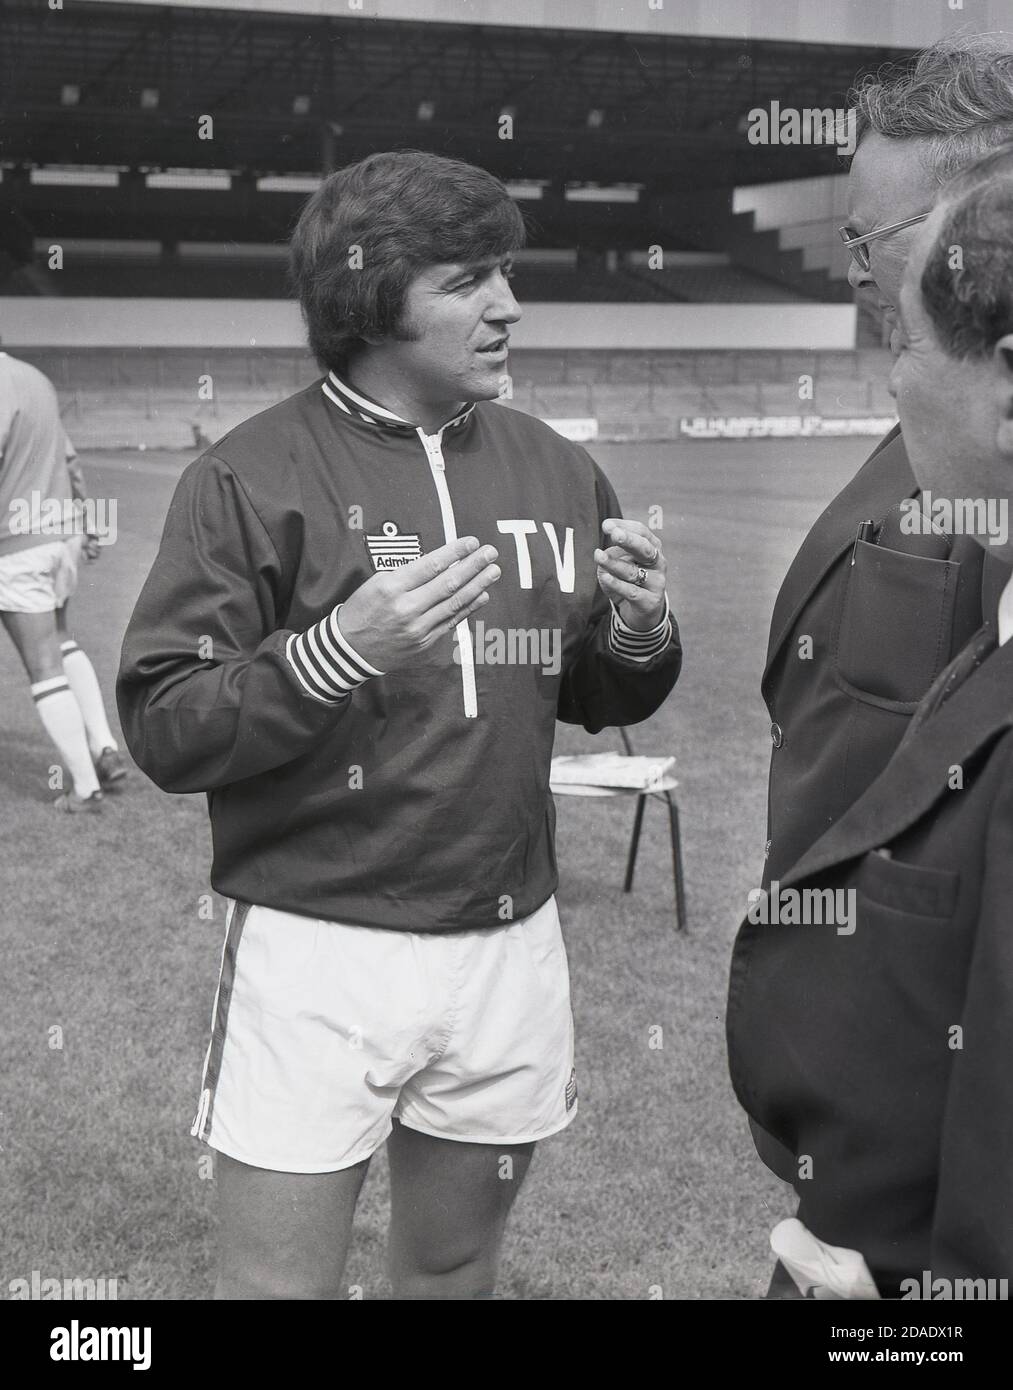 1976, historical, Terry Venables, the new Coach of Crystal Palace FC wearing a tracksuit top and shorts, talking to members of the press outside on the pitch at club's ground, Selhurst Park, Southeast London, England, UK. Venables would go on and win the Second Division championship with the club in 1979. Stock Photo